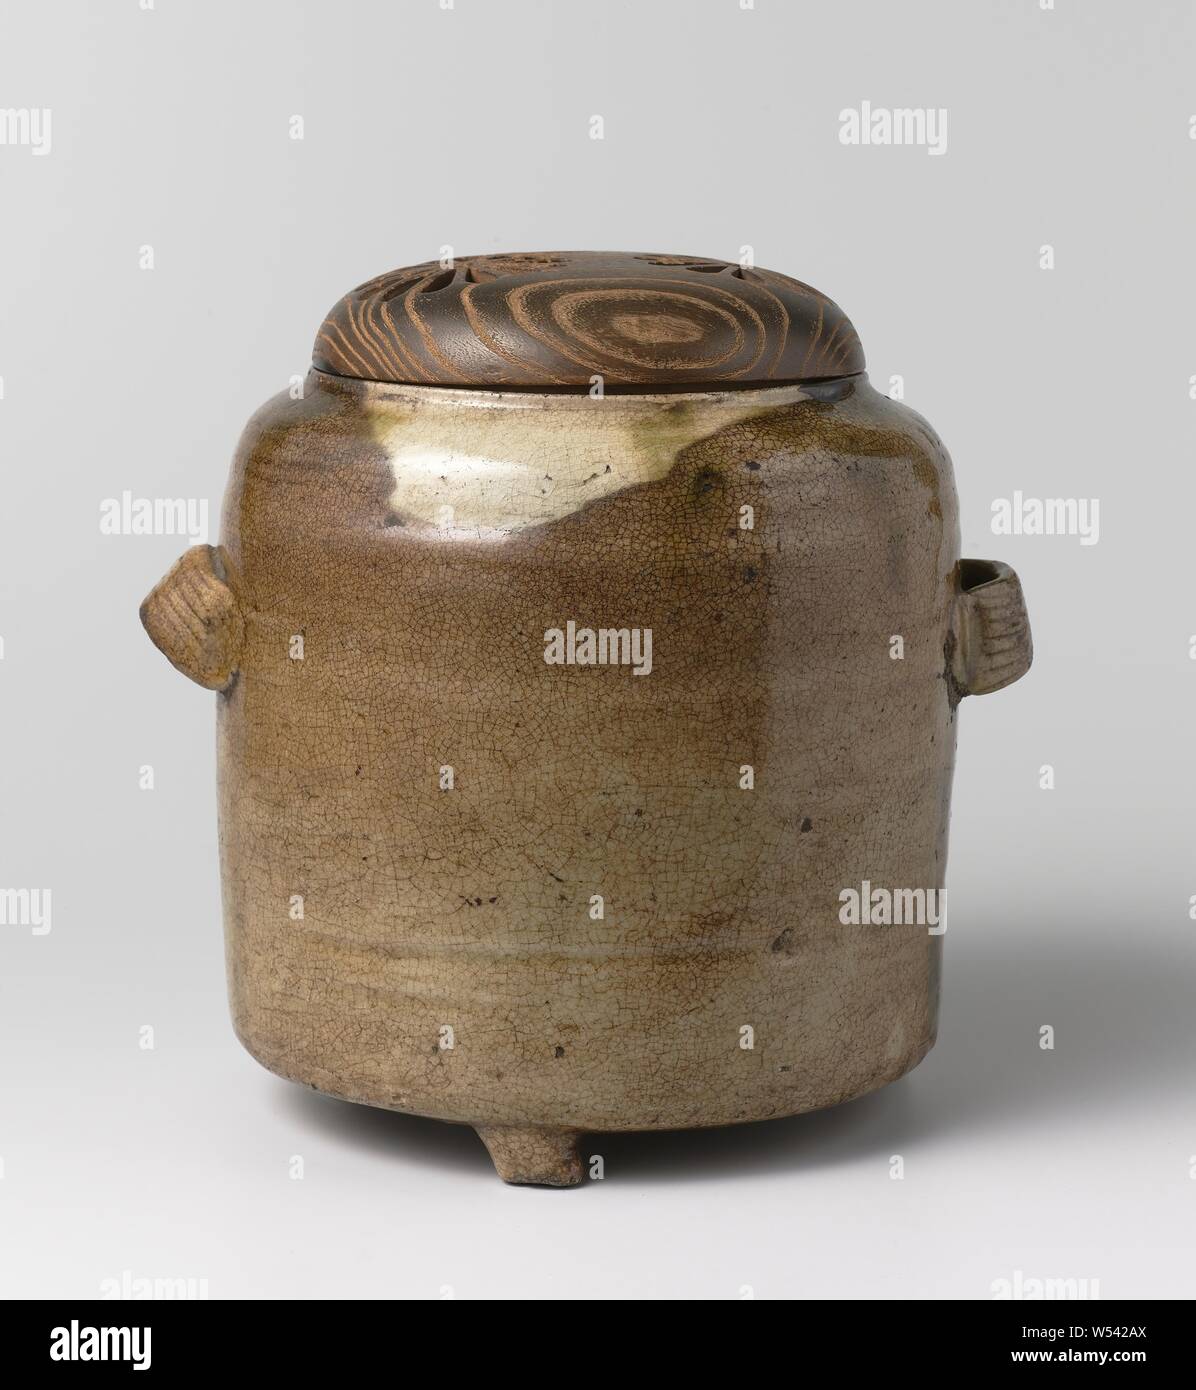 Charcoal burner, charcoal burner made of stoneware on three short legs and with two handles, covered with a green, crackled glaze. Old label on the inside with 'Ki Seto / Veiling Breuer'. Ki Seto., anonymous, Japan, c. 1600 - c. 1699, Edo-period (1600-1868), stoneware, glaze, deksel, vitrification, h 19.6 cm d 14.3 cm d 19.3 cm l 23.5 cm Stock Photo